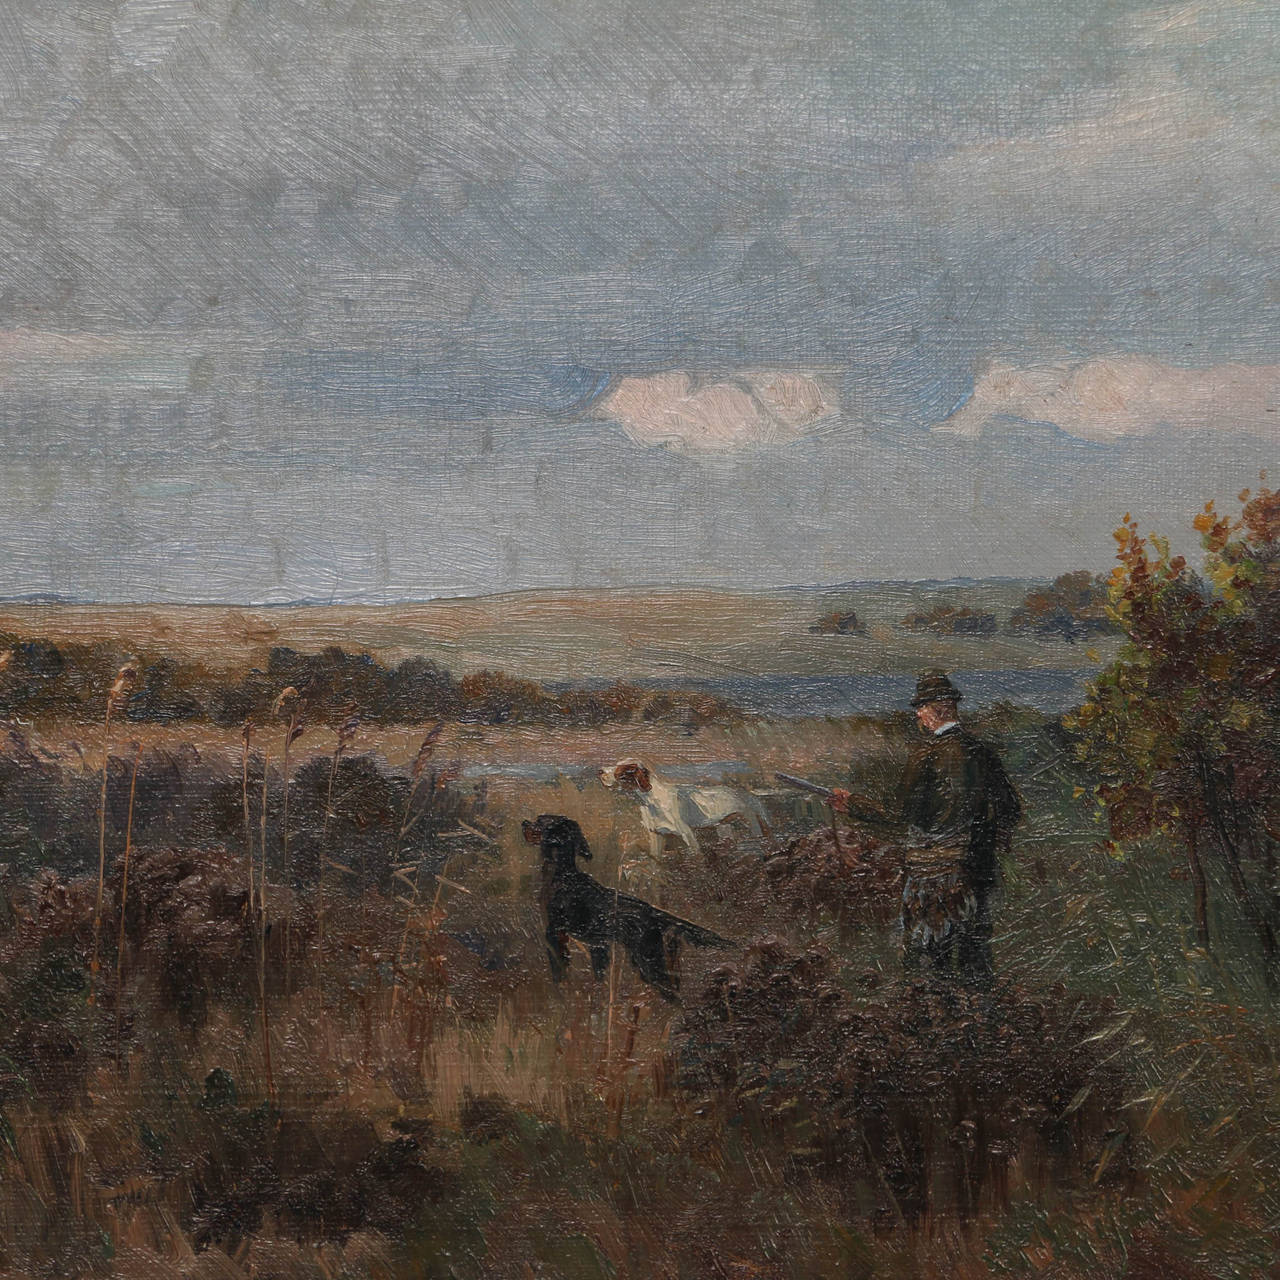 Original oil on canvas of hunting scene by Simon Simonsen (1841-1928). A hunter and hunting dogs by Svebølle bog, signed Simon Simonsen 1904. Excellent quality, please review close up photos to appreciate the fine details.